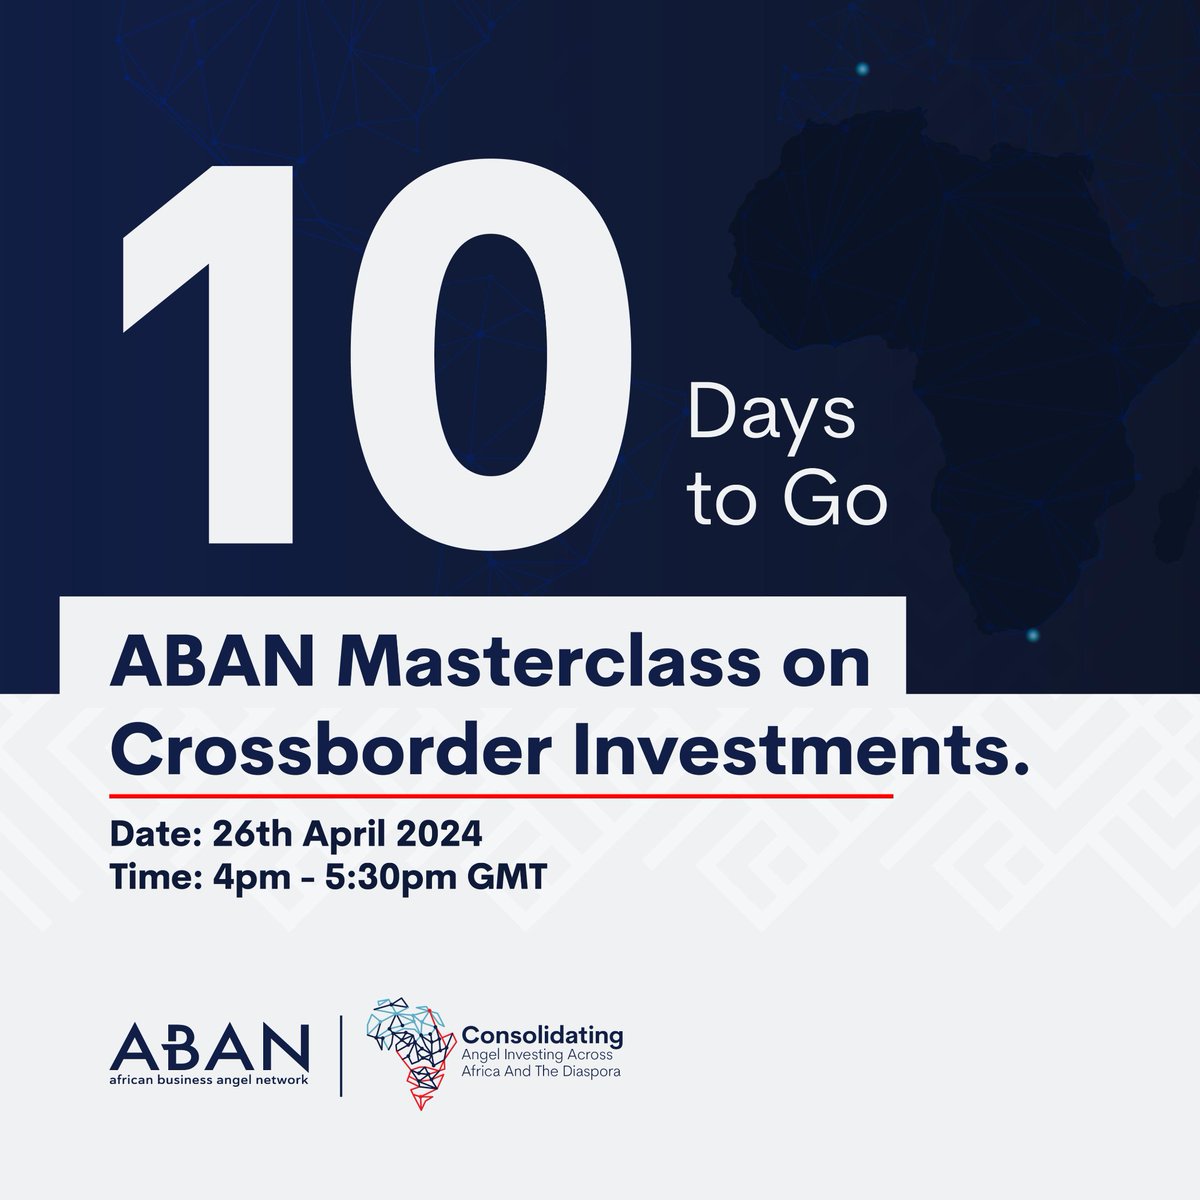 📢Only 10 days left until the #ABANMasterclass on #CrossBorderInvestments! Are you prepared to gain insights on identifying #investment prospects across various African markets, managing risks & maximizing returns in cross-border ventures? Register 👉bit.ly/3xvGftJ!